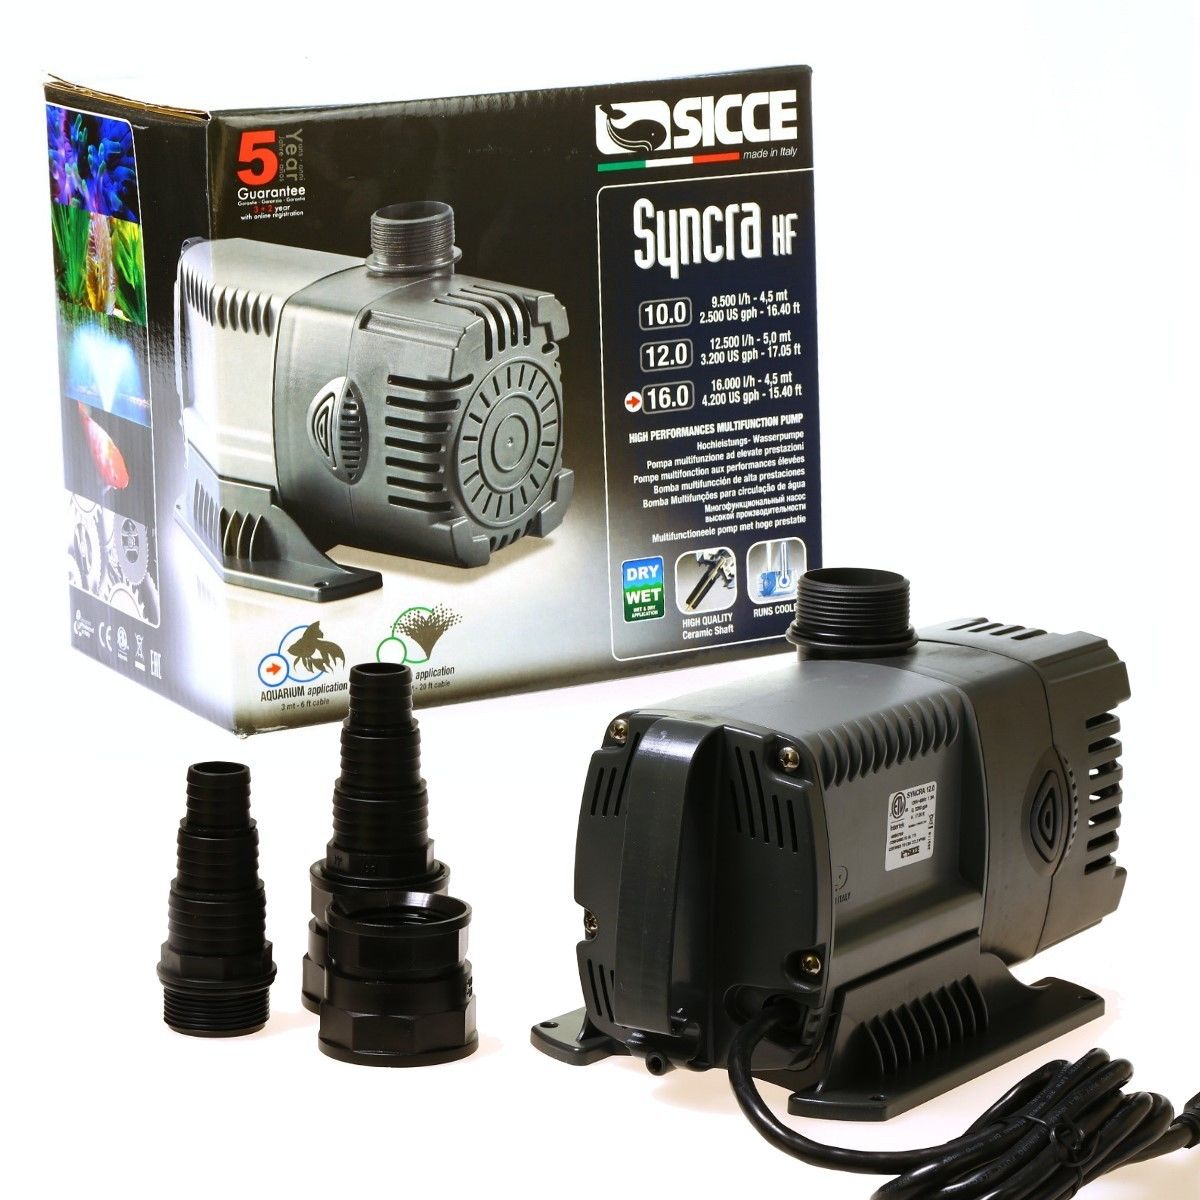 Picture of Sicce USA 010502 Syncra HF 16.0 High Flow Pond Powerhead Fountain Waterfall Pump